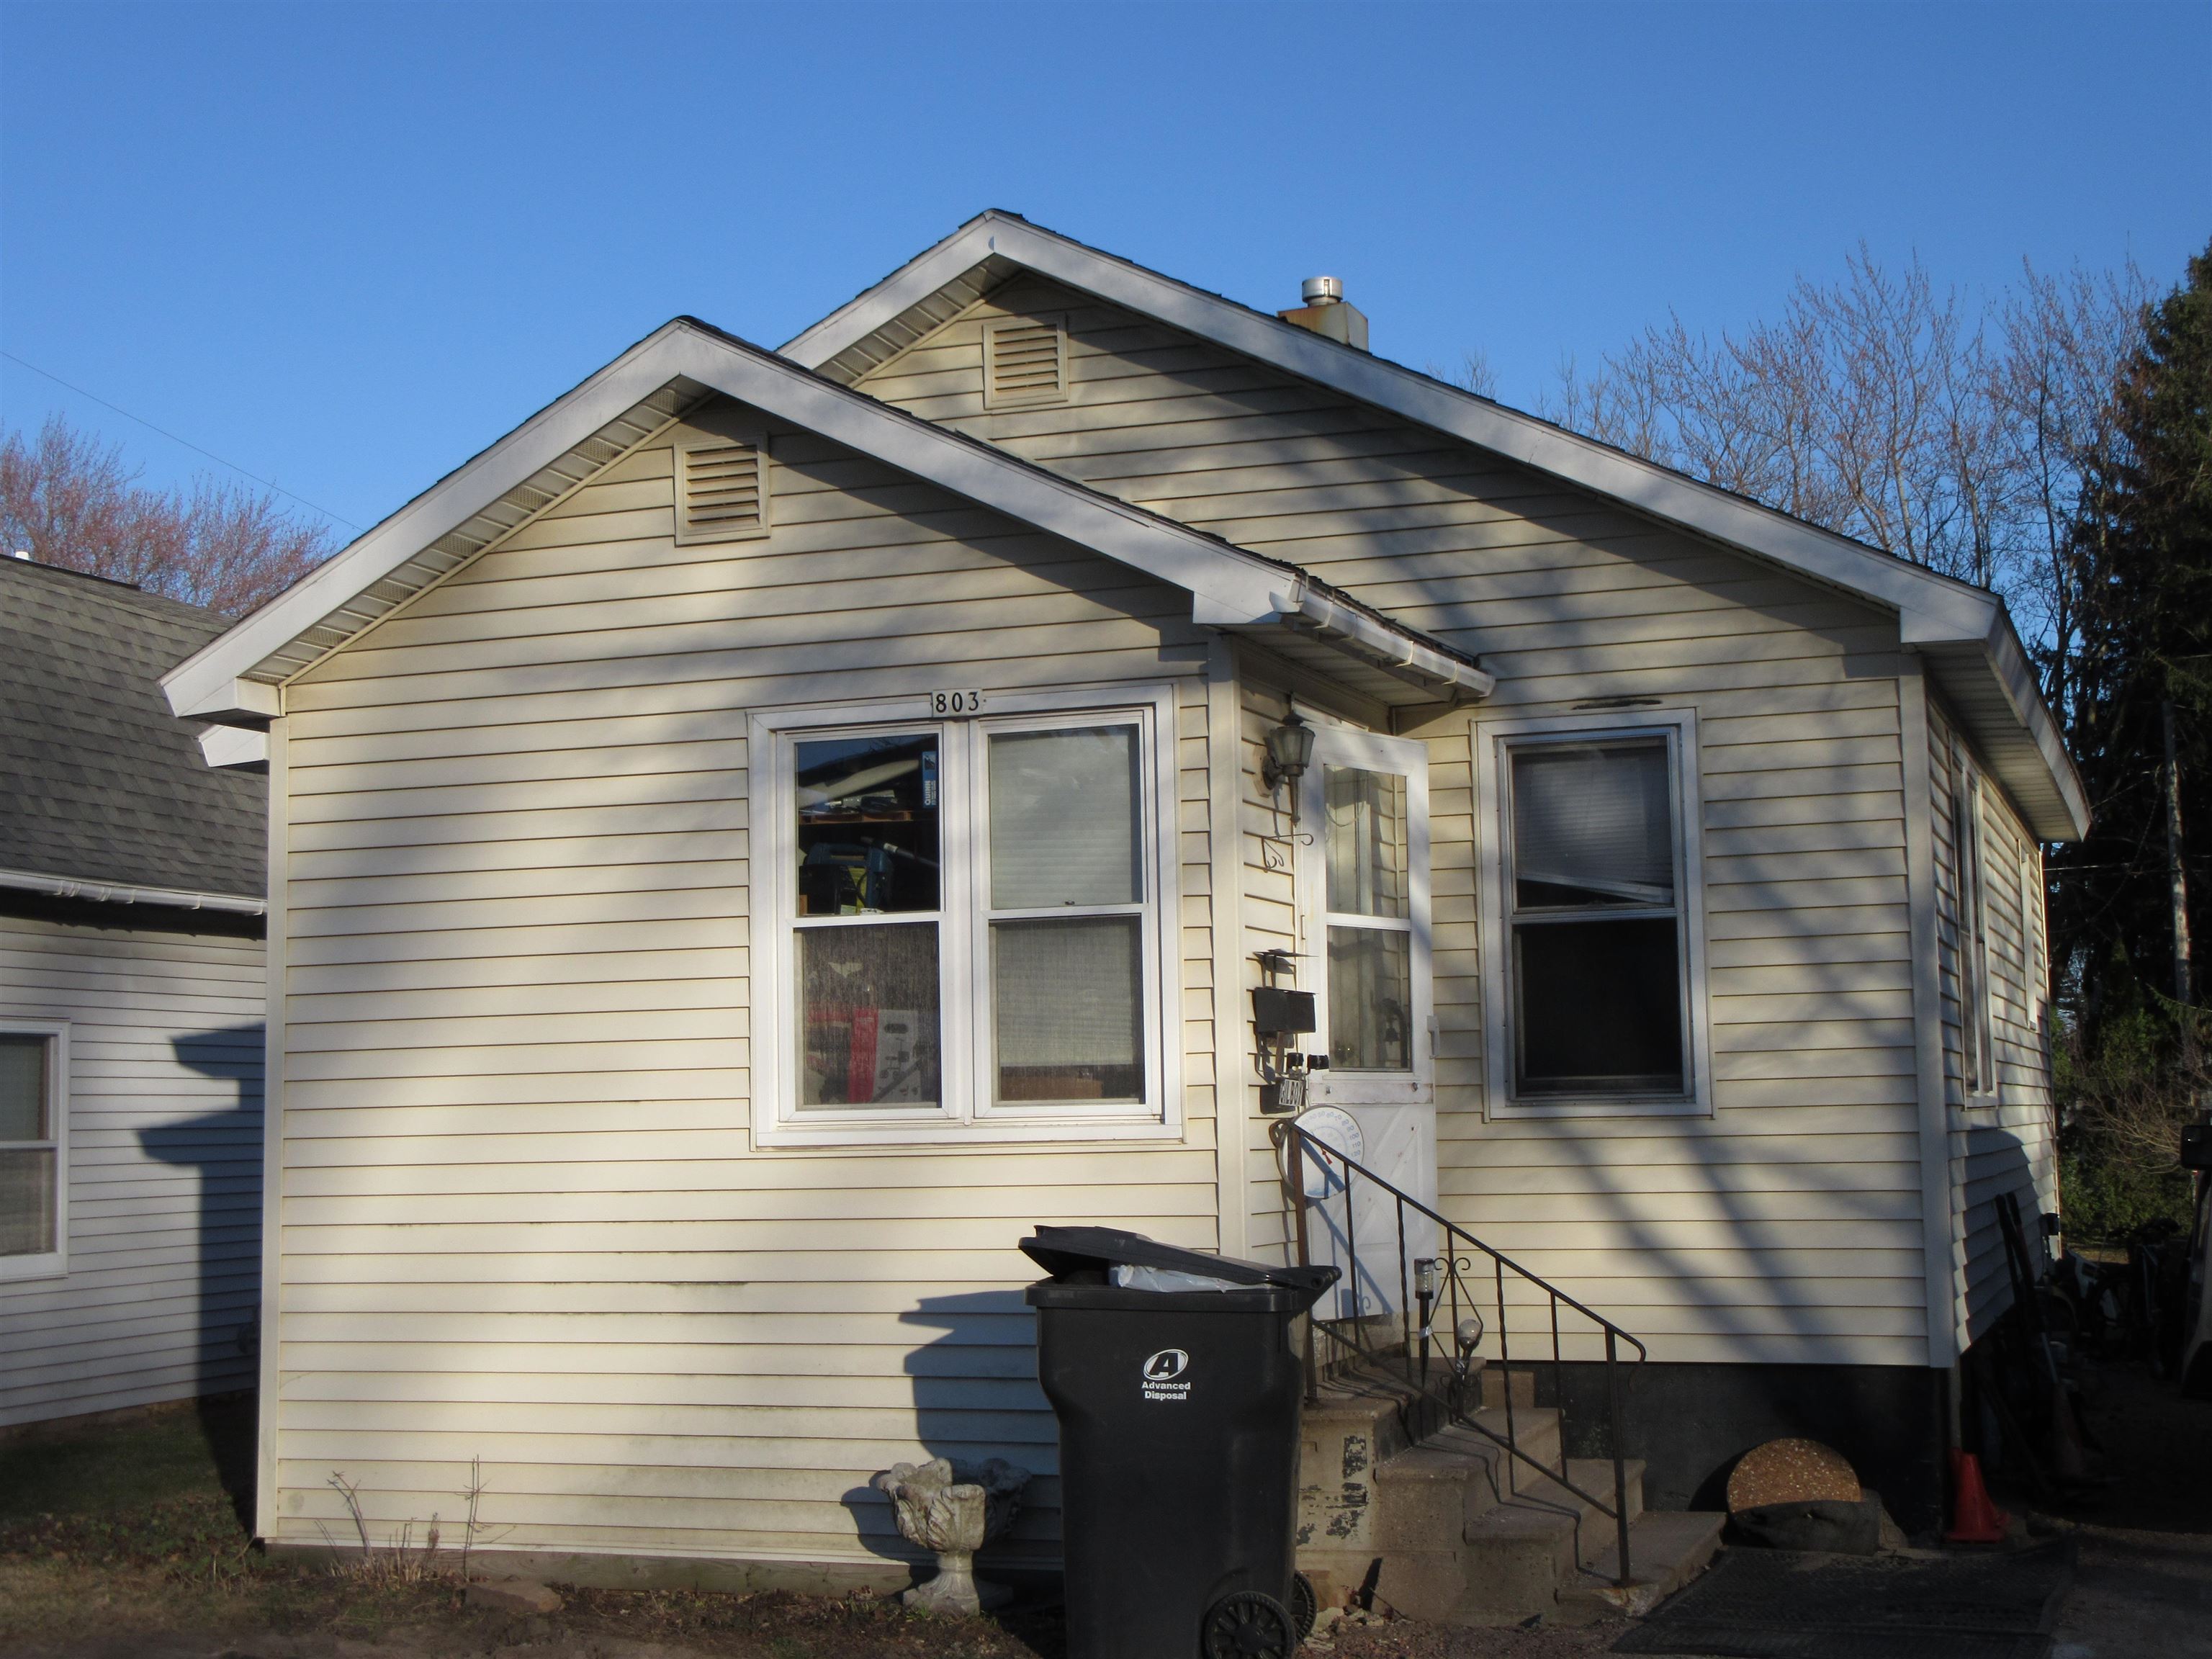 803 S PEACH AVENUE, Marshfield, Wisconsin 54449, 2 Bedrooms Bedrooms, ,1 BathroomBathrooms,Residential,For Sale,803 S PEACH AVENUE,22400933